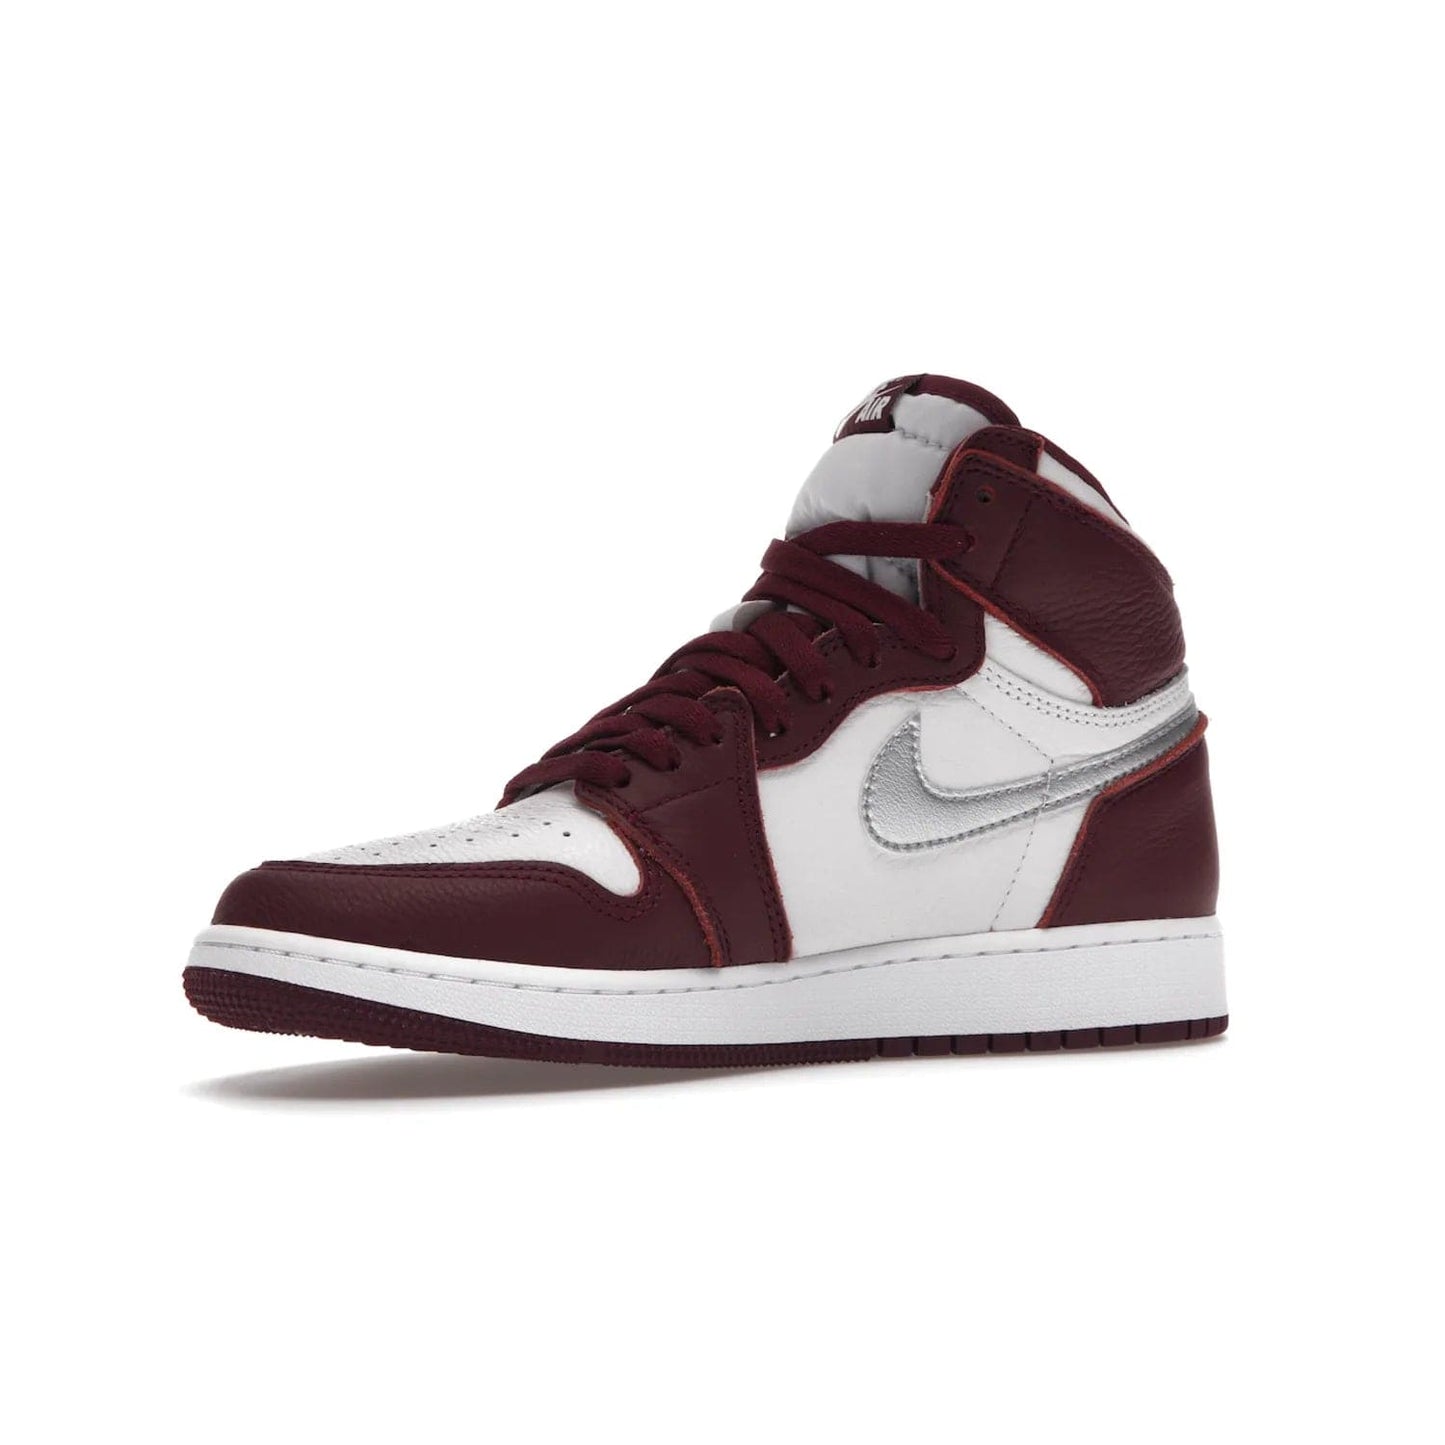 Jordan 1 Retro High OG Bordeaux (GS) - Image 16 - Only at www.BallersClubKickz.com - #
Introducing the Air Jordan 1 Retro High OG Bordeaux GS – a signature colorway part of the Jordan Brand Fall 2021 lineup. White leather upper & Bordeaux overlays, metallic silver swoosh, jeweled Air Jordan Wings logo & more. Step up your style game with this sleek fall season silhouette.